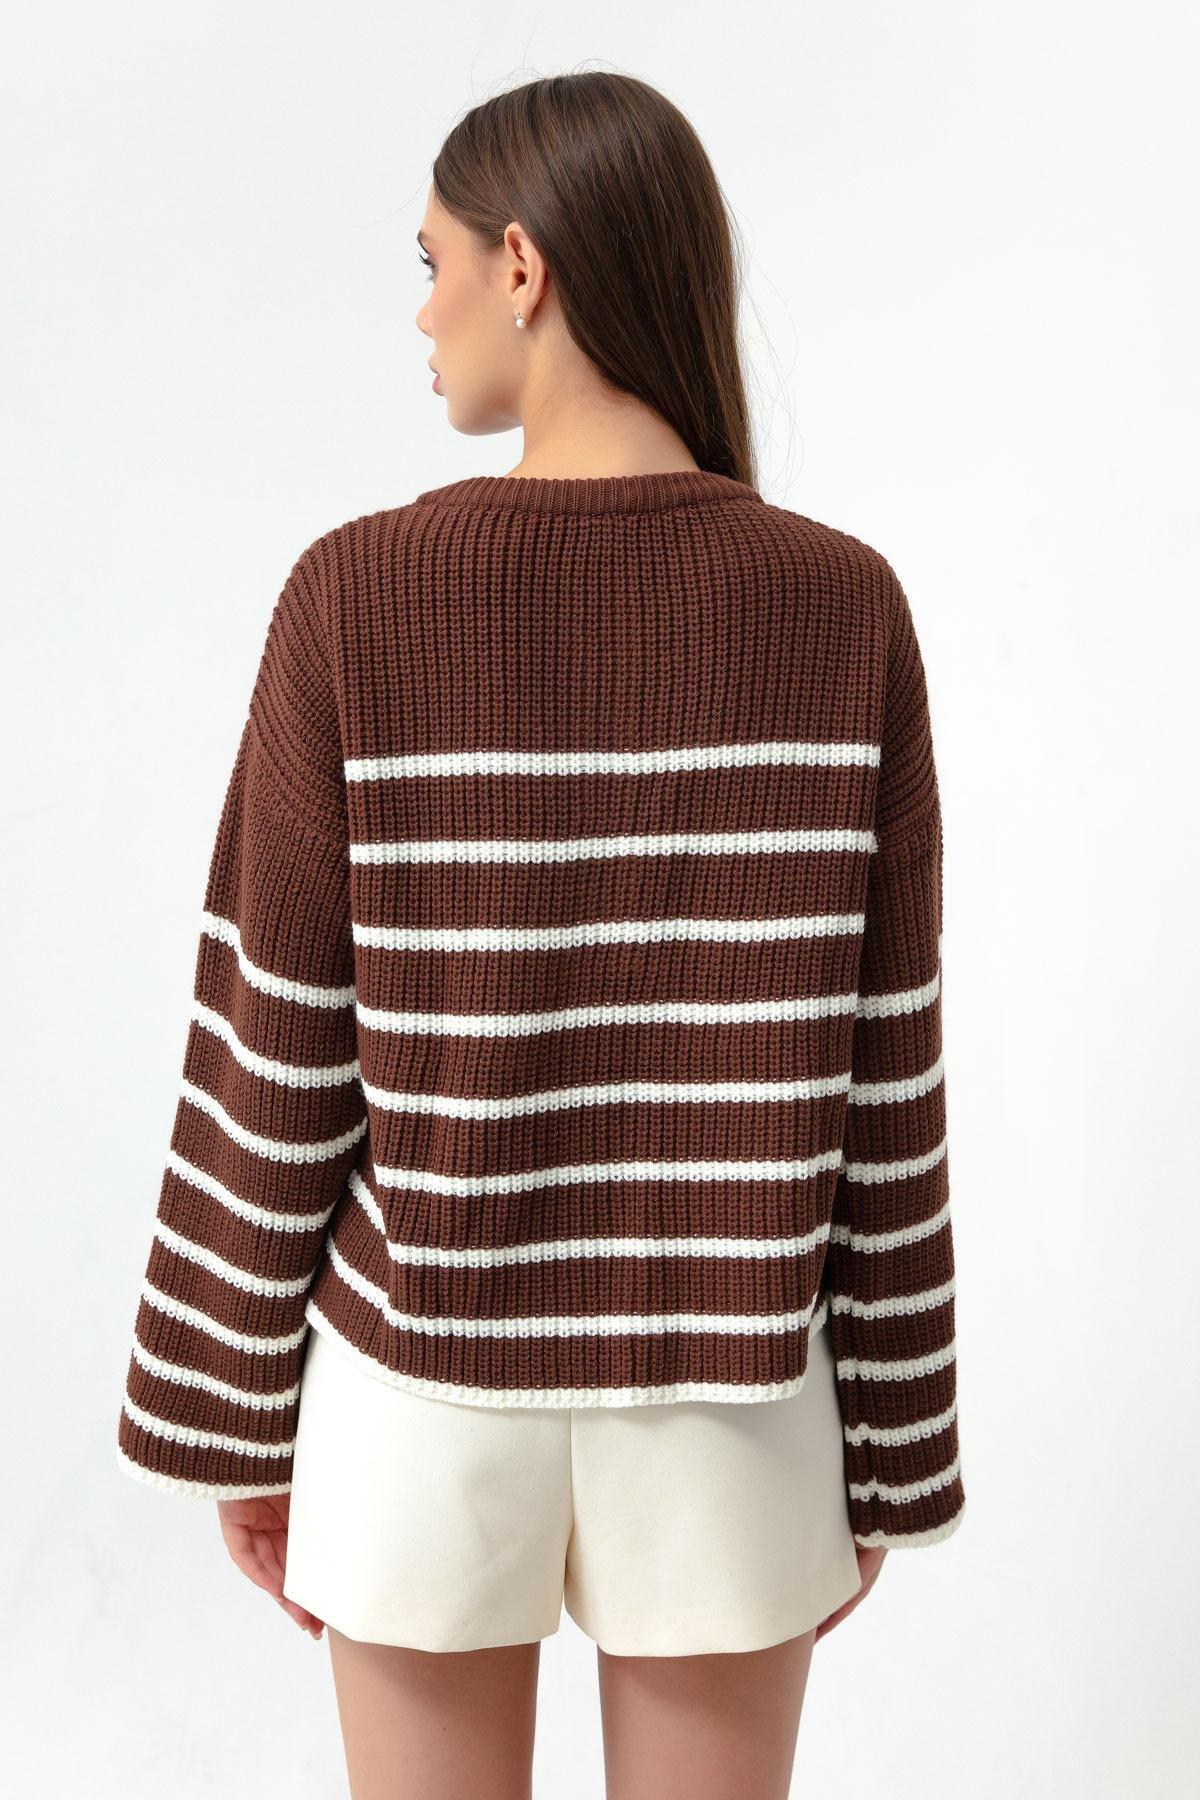 Lafaba - Brown Striped Gold Button Detailed Knitwear Sweater